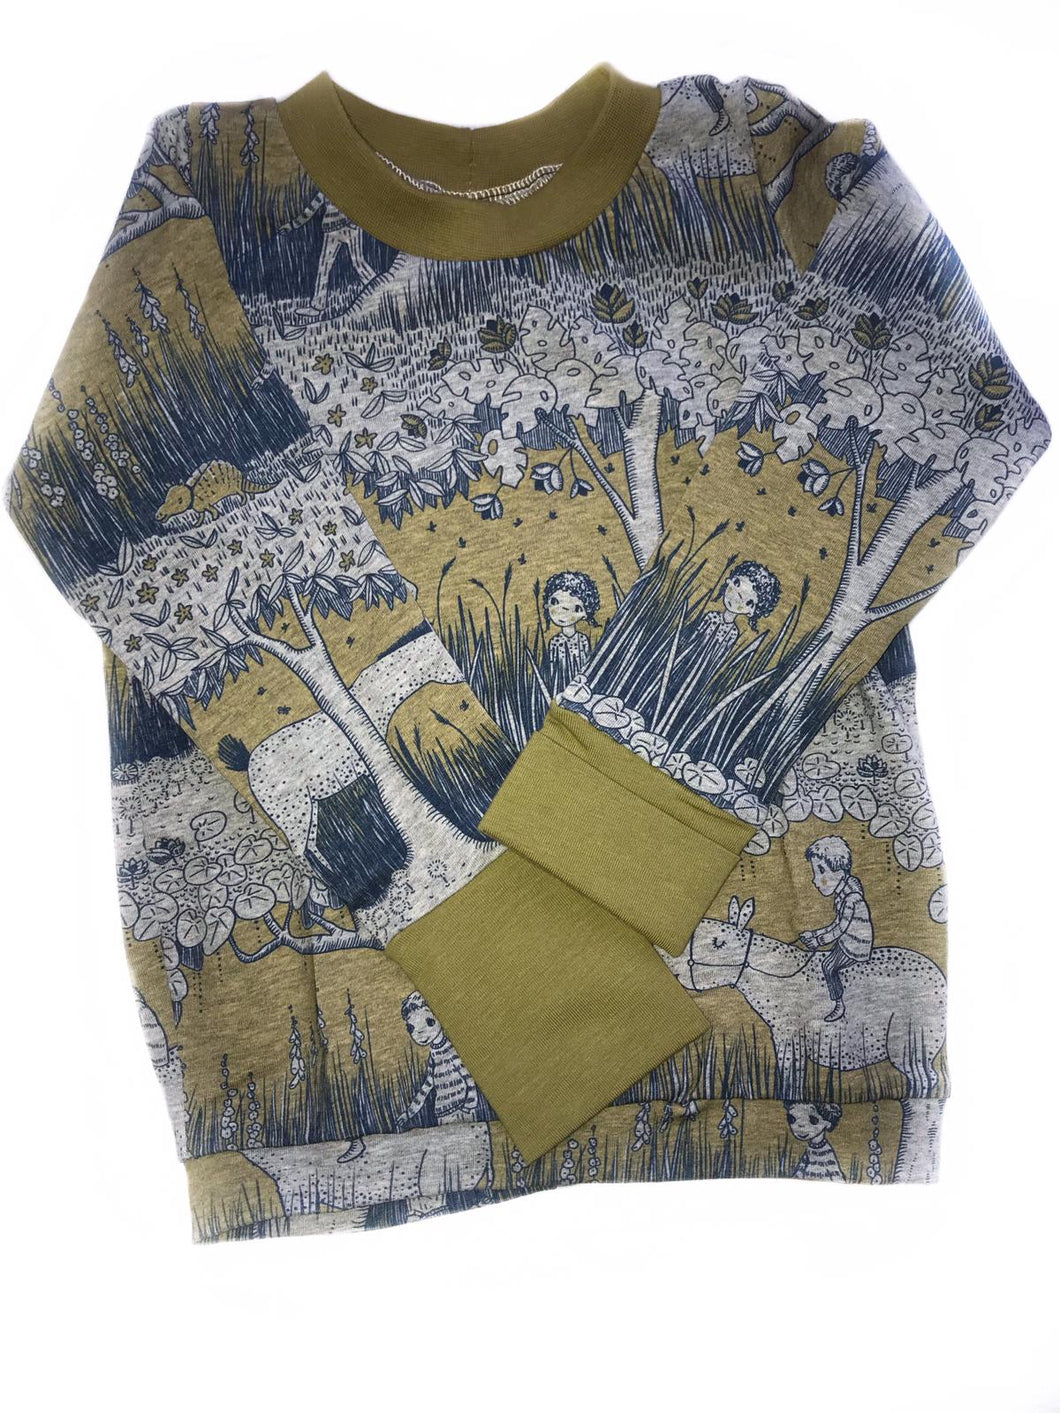 Long-Sleeve Top (Grow With Baby)